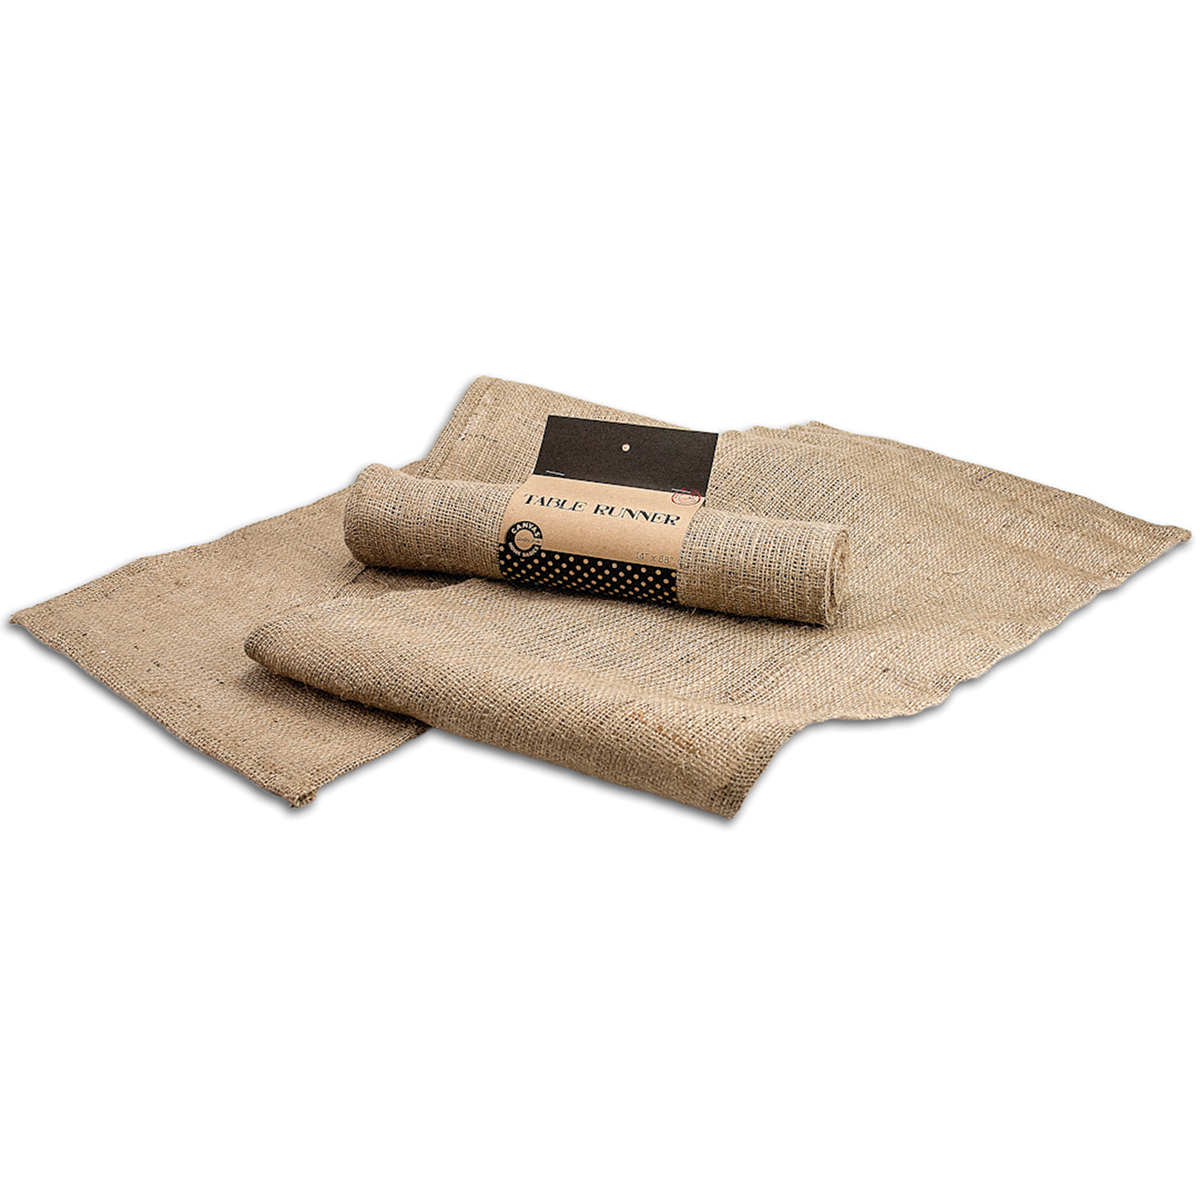 Burlap Table Runner 14"X58"-Natural, Pk 3, Canvas Corp - image 1 of 2